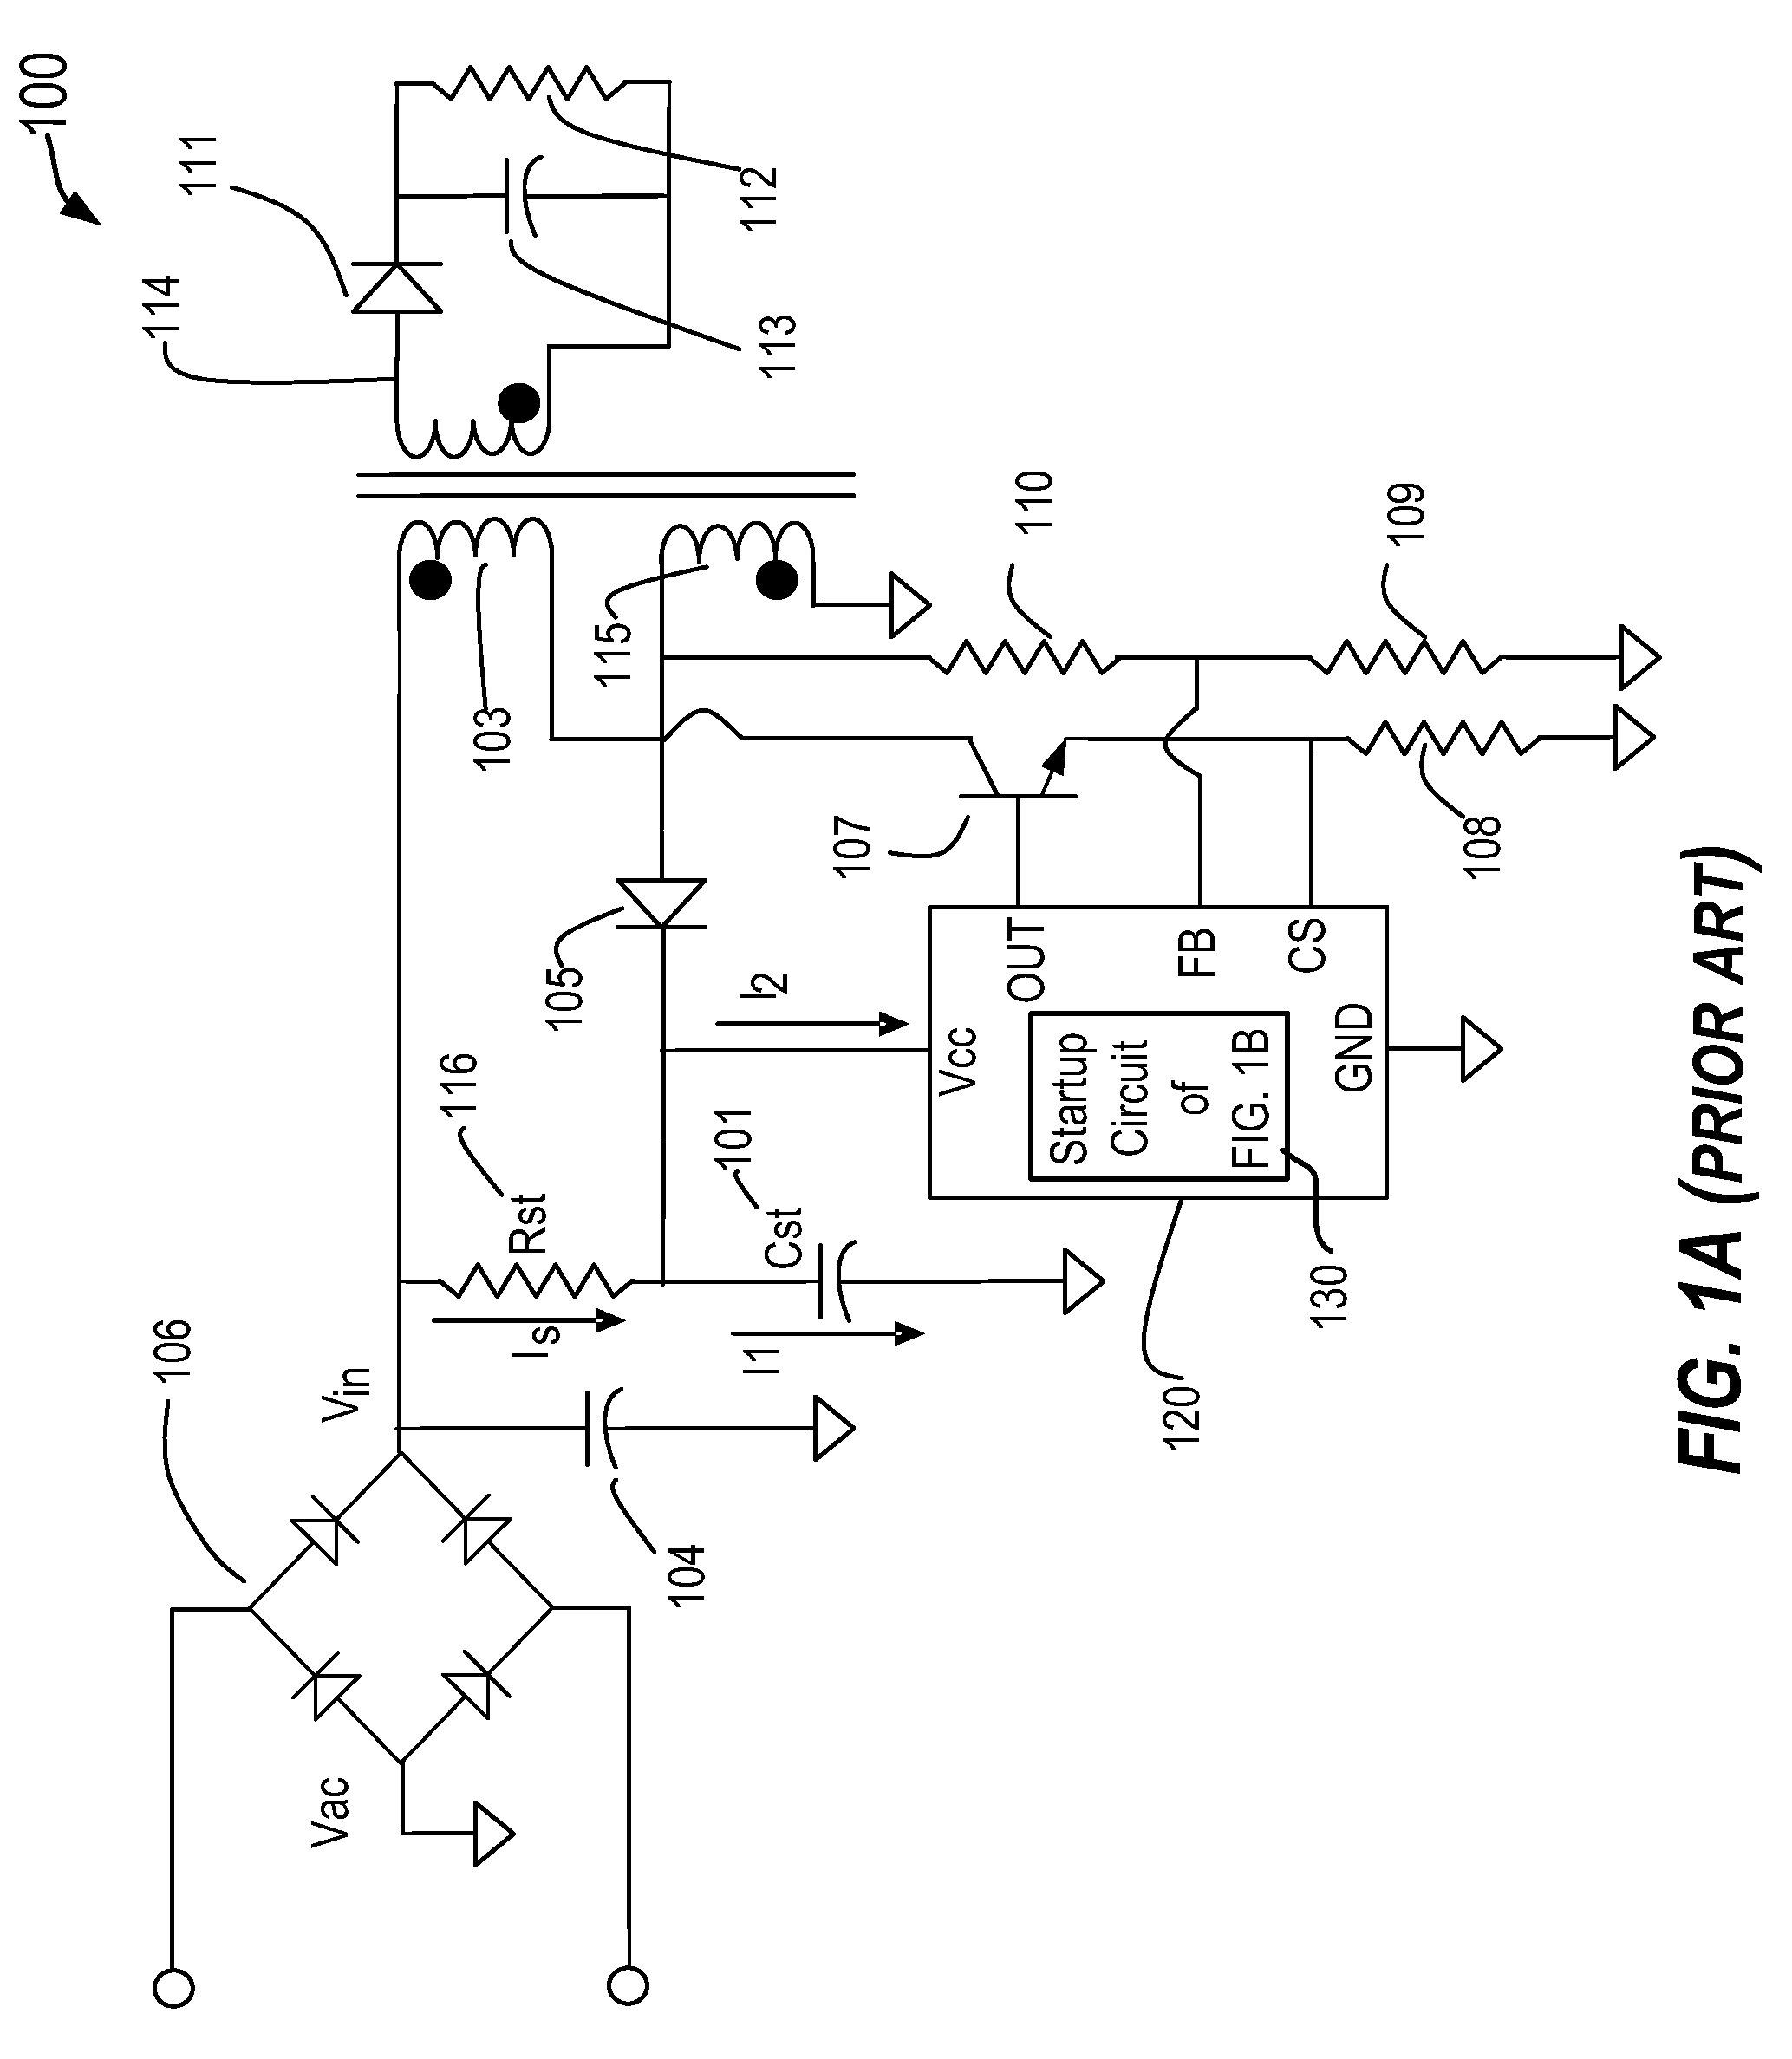 Method and apparatus of low current startup circuit for switching mode power supplies